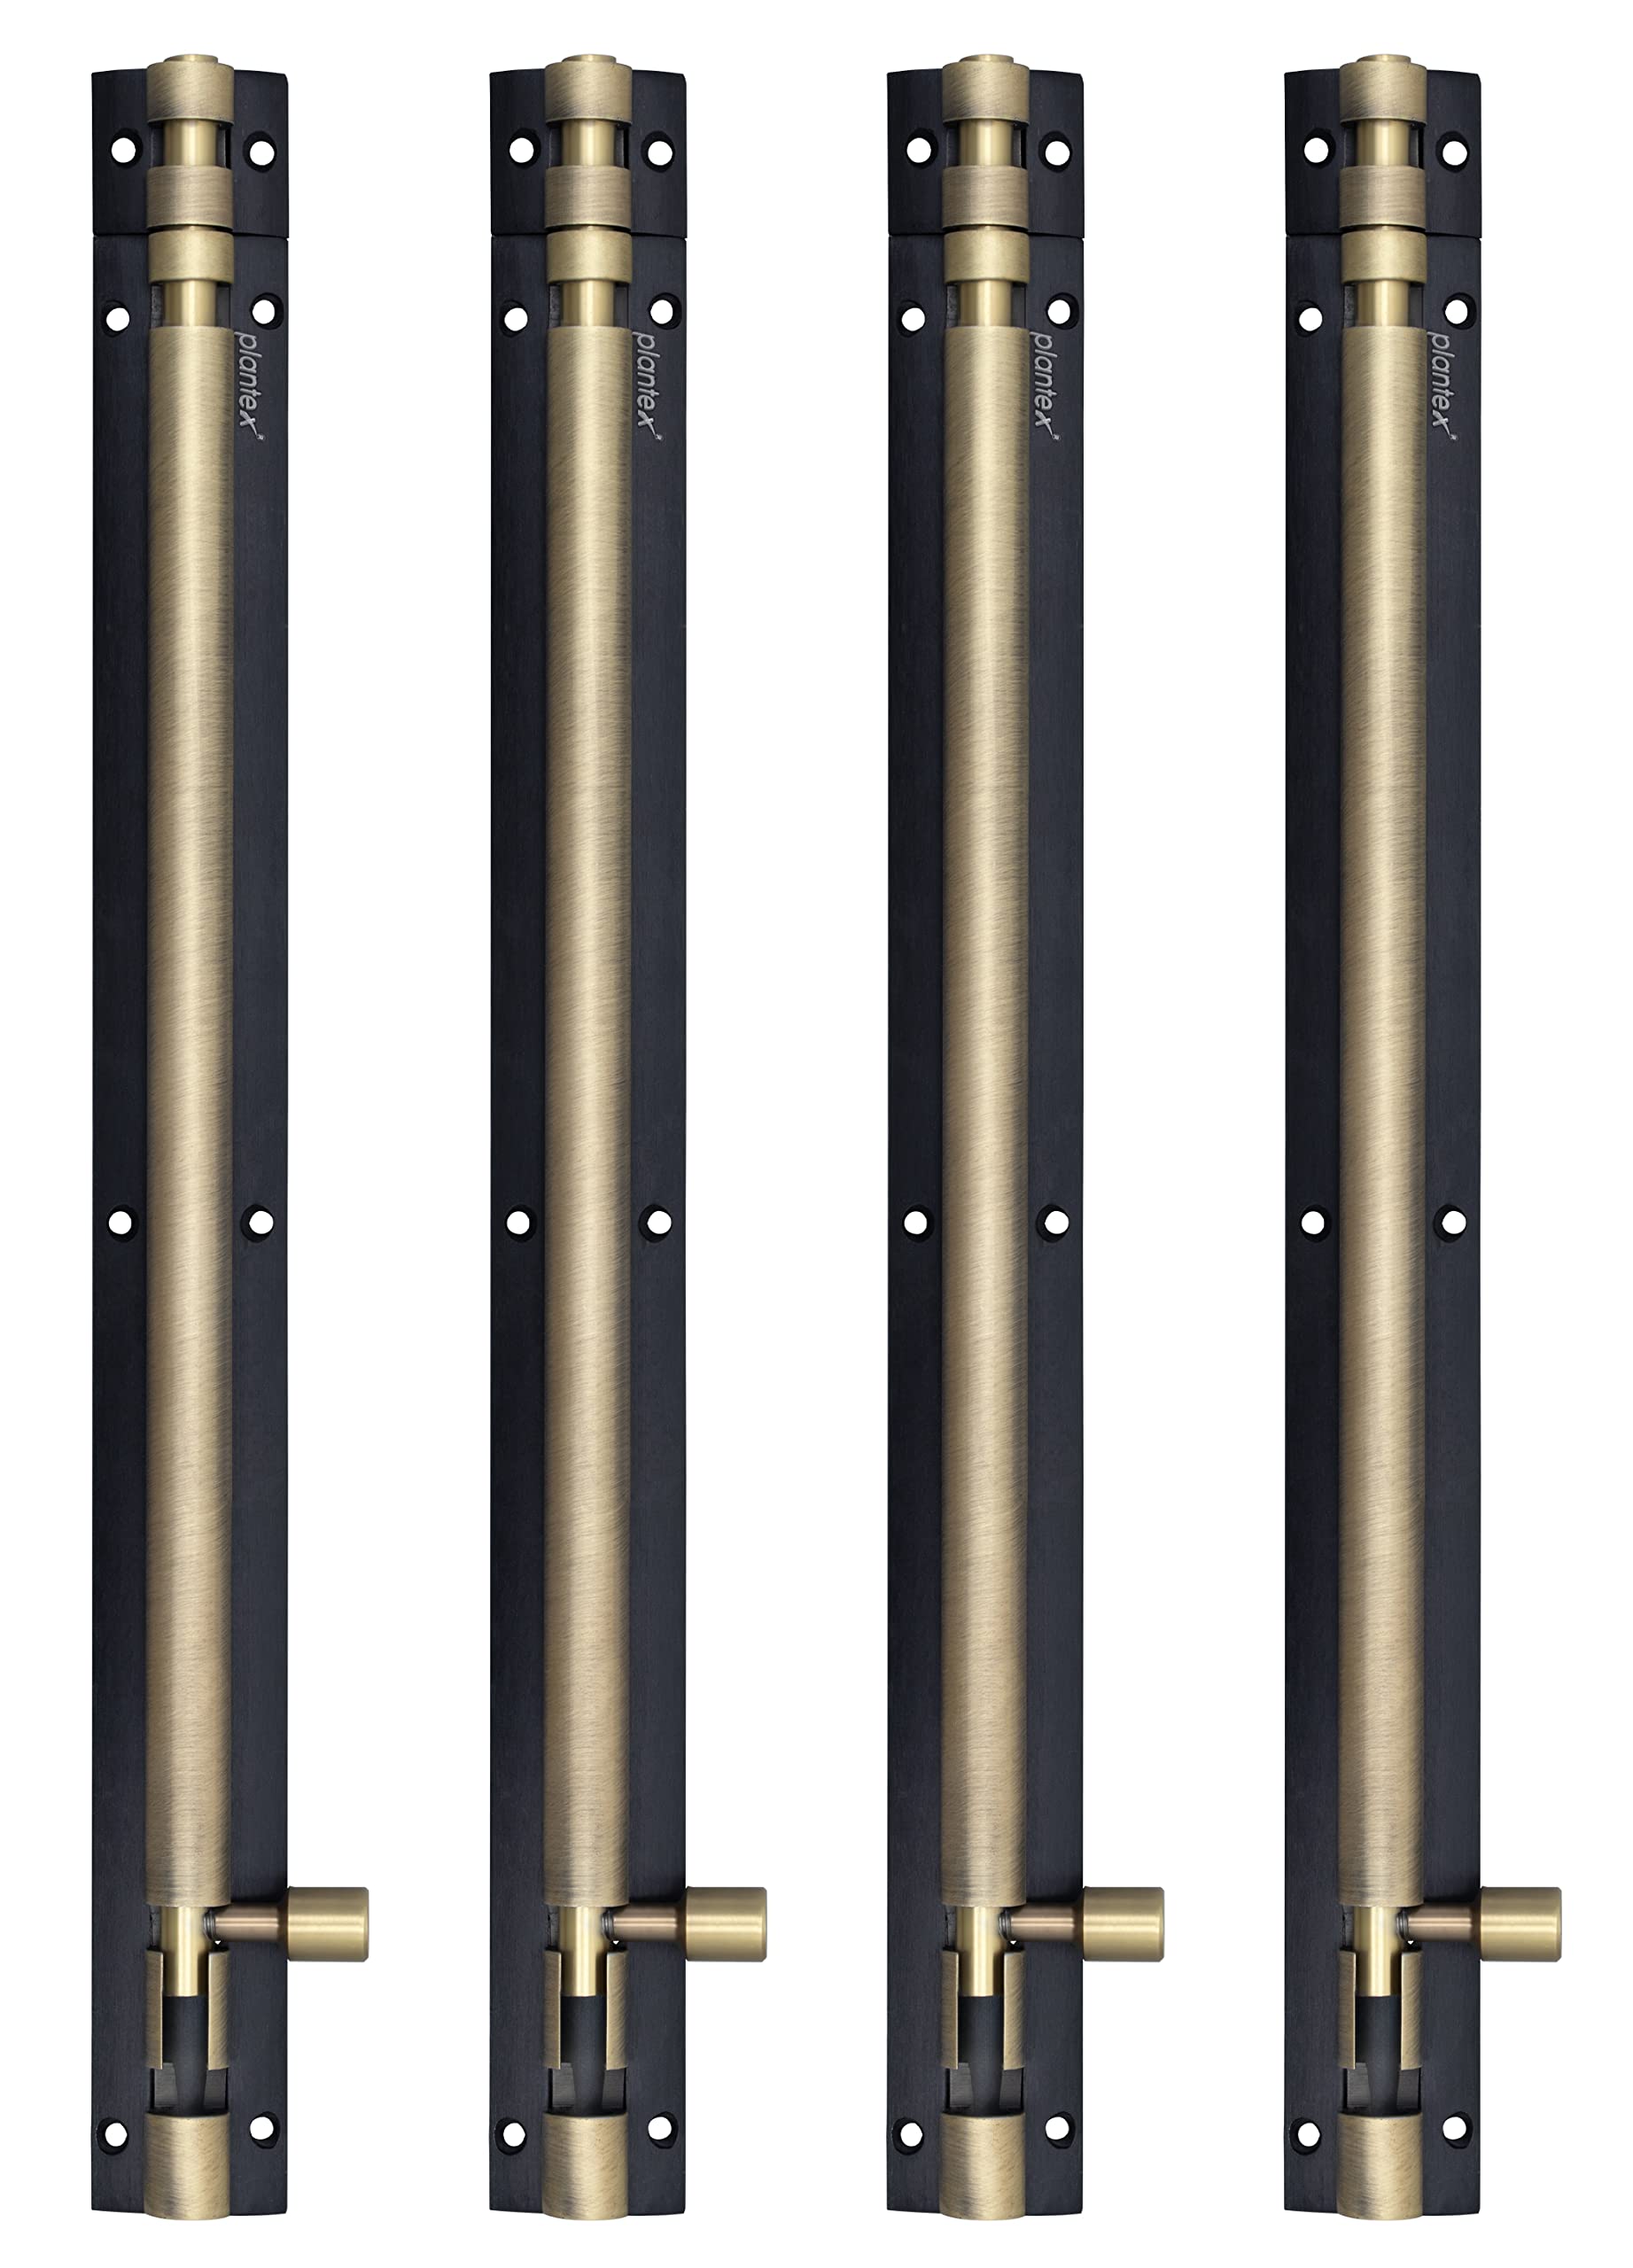 Plantex Heavy Duty 12-inch Joint-Less Tower Bolt for Wooden and PVC Doors for Home Main Door/Bathroom/Windows/Wardrobe - Pack of 4 (703, Brass Antique and Black)